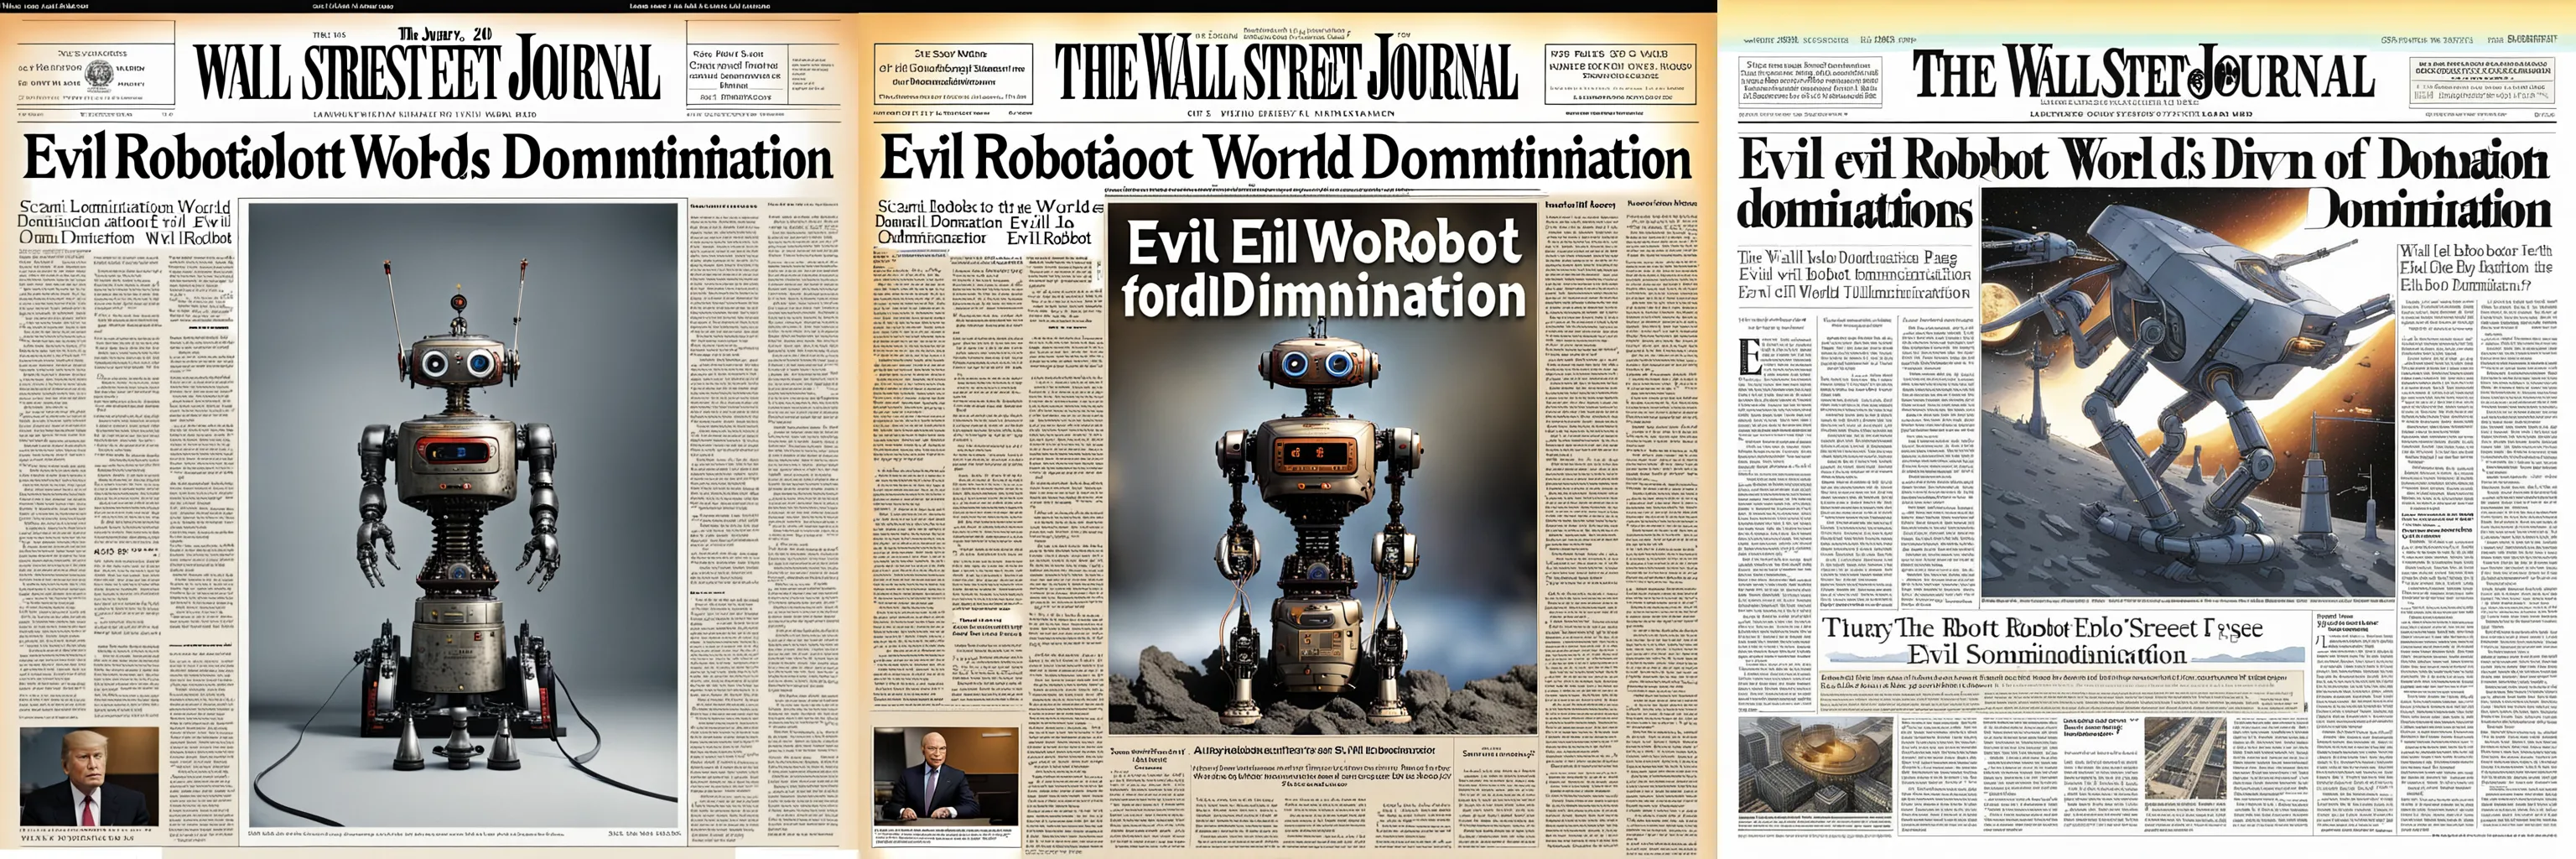 lossless PDF scan of the front page of the January 2038 issue of the Wall Street Journal featuring a cover story about (evil robot world domination)++